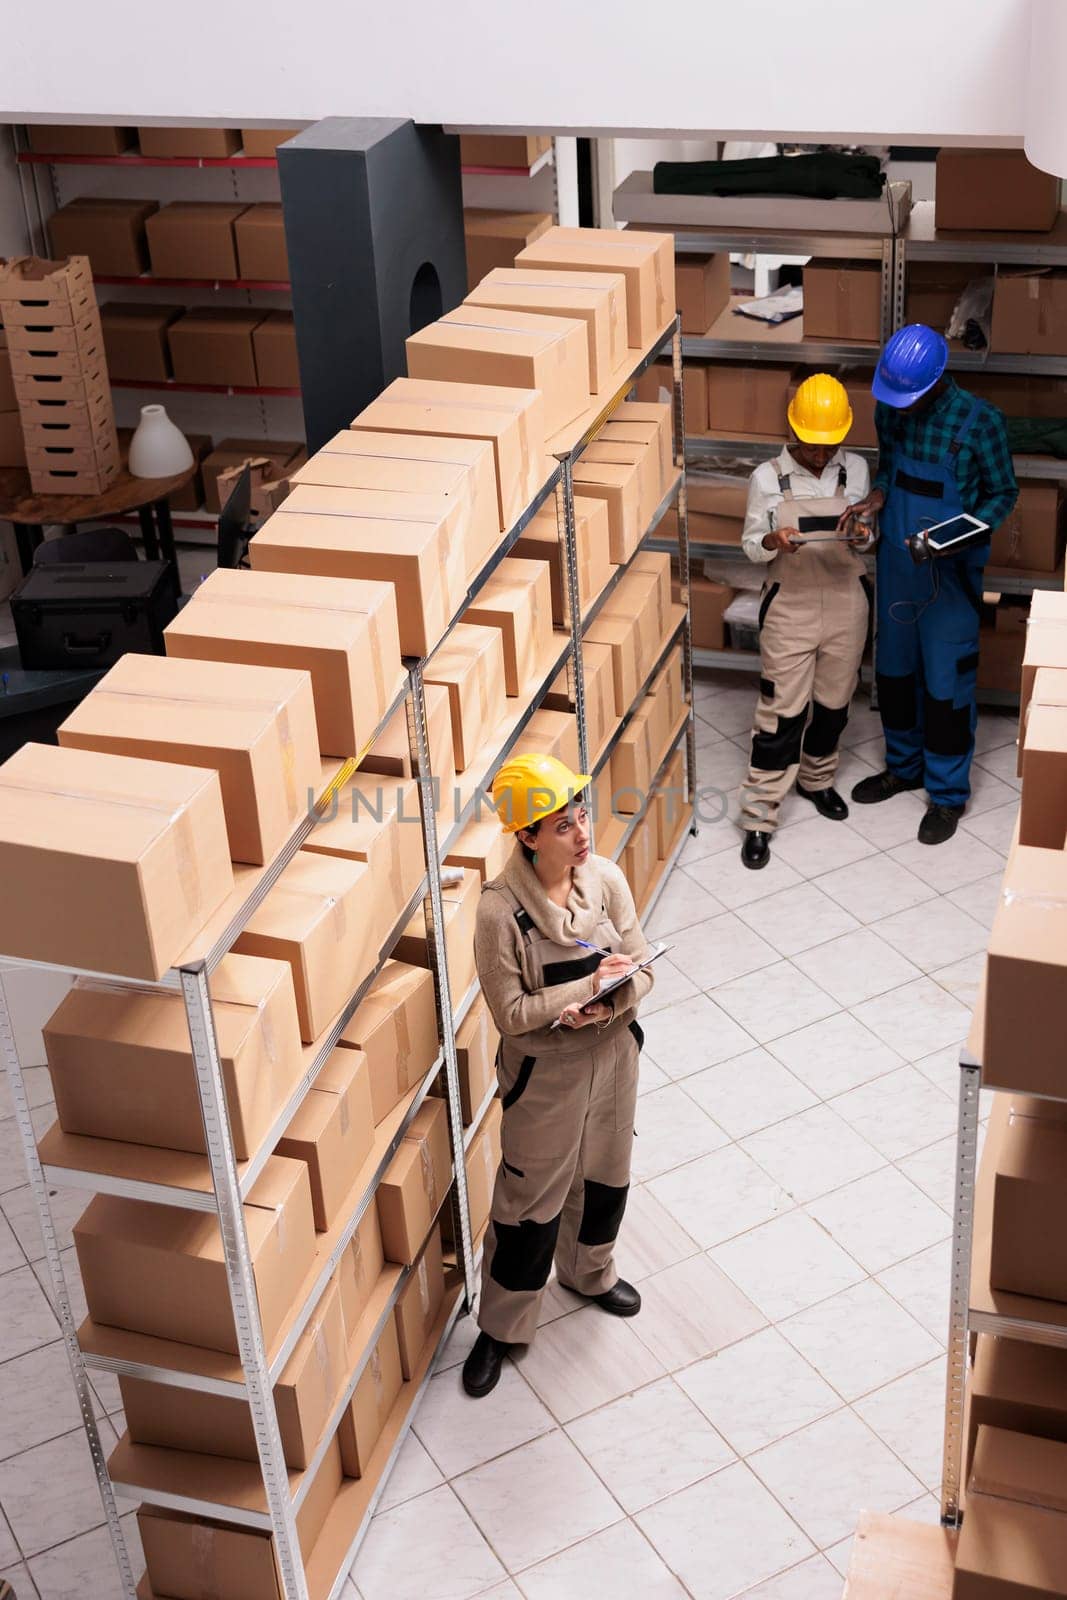 Warehouse assistants standing near cardboard boxes shelves and doing inventory. Caucasian and african american coworkers team wearing protective helmets working in delivery service storage